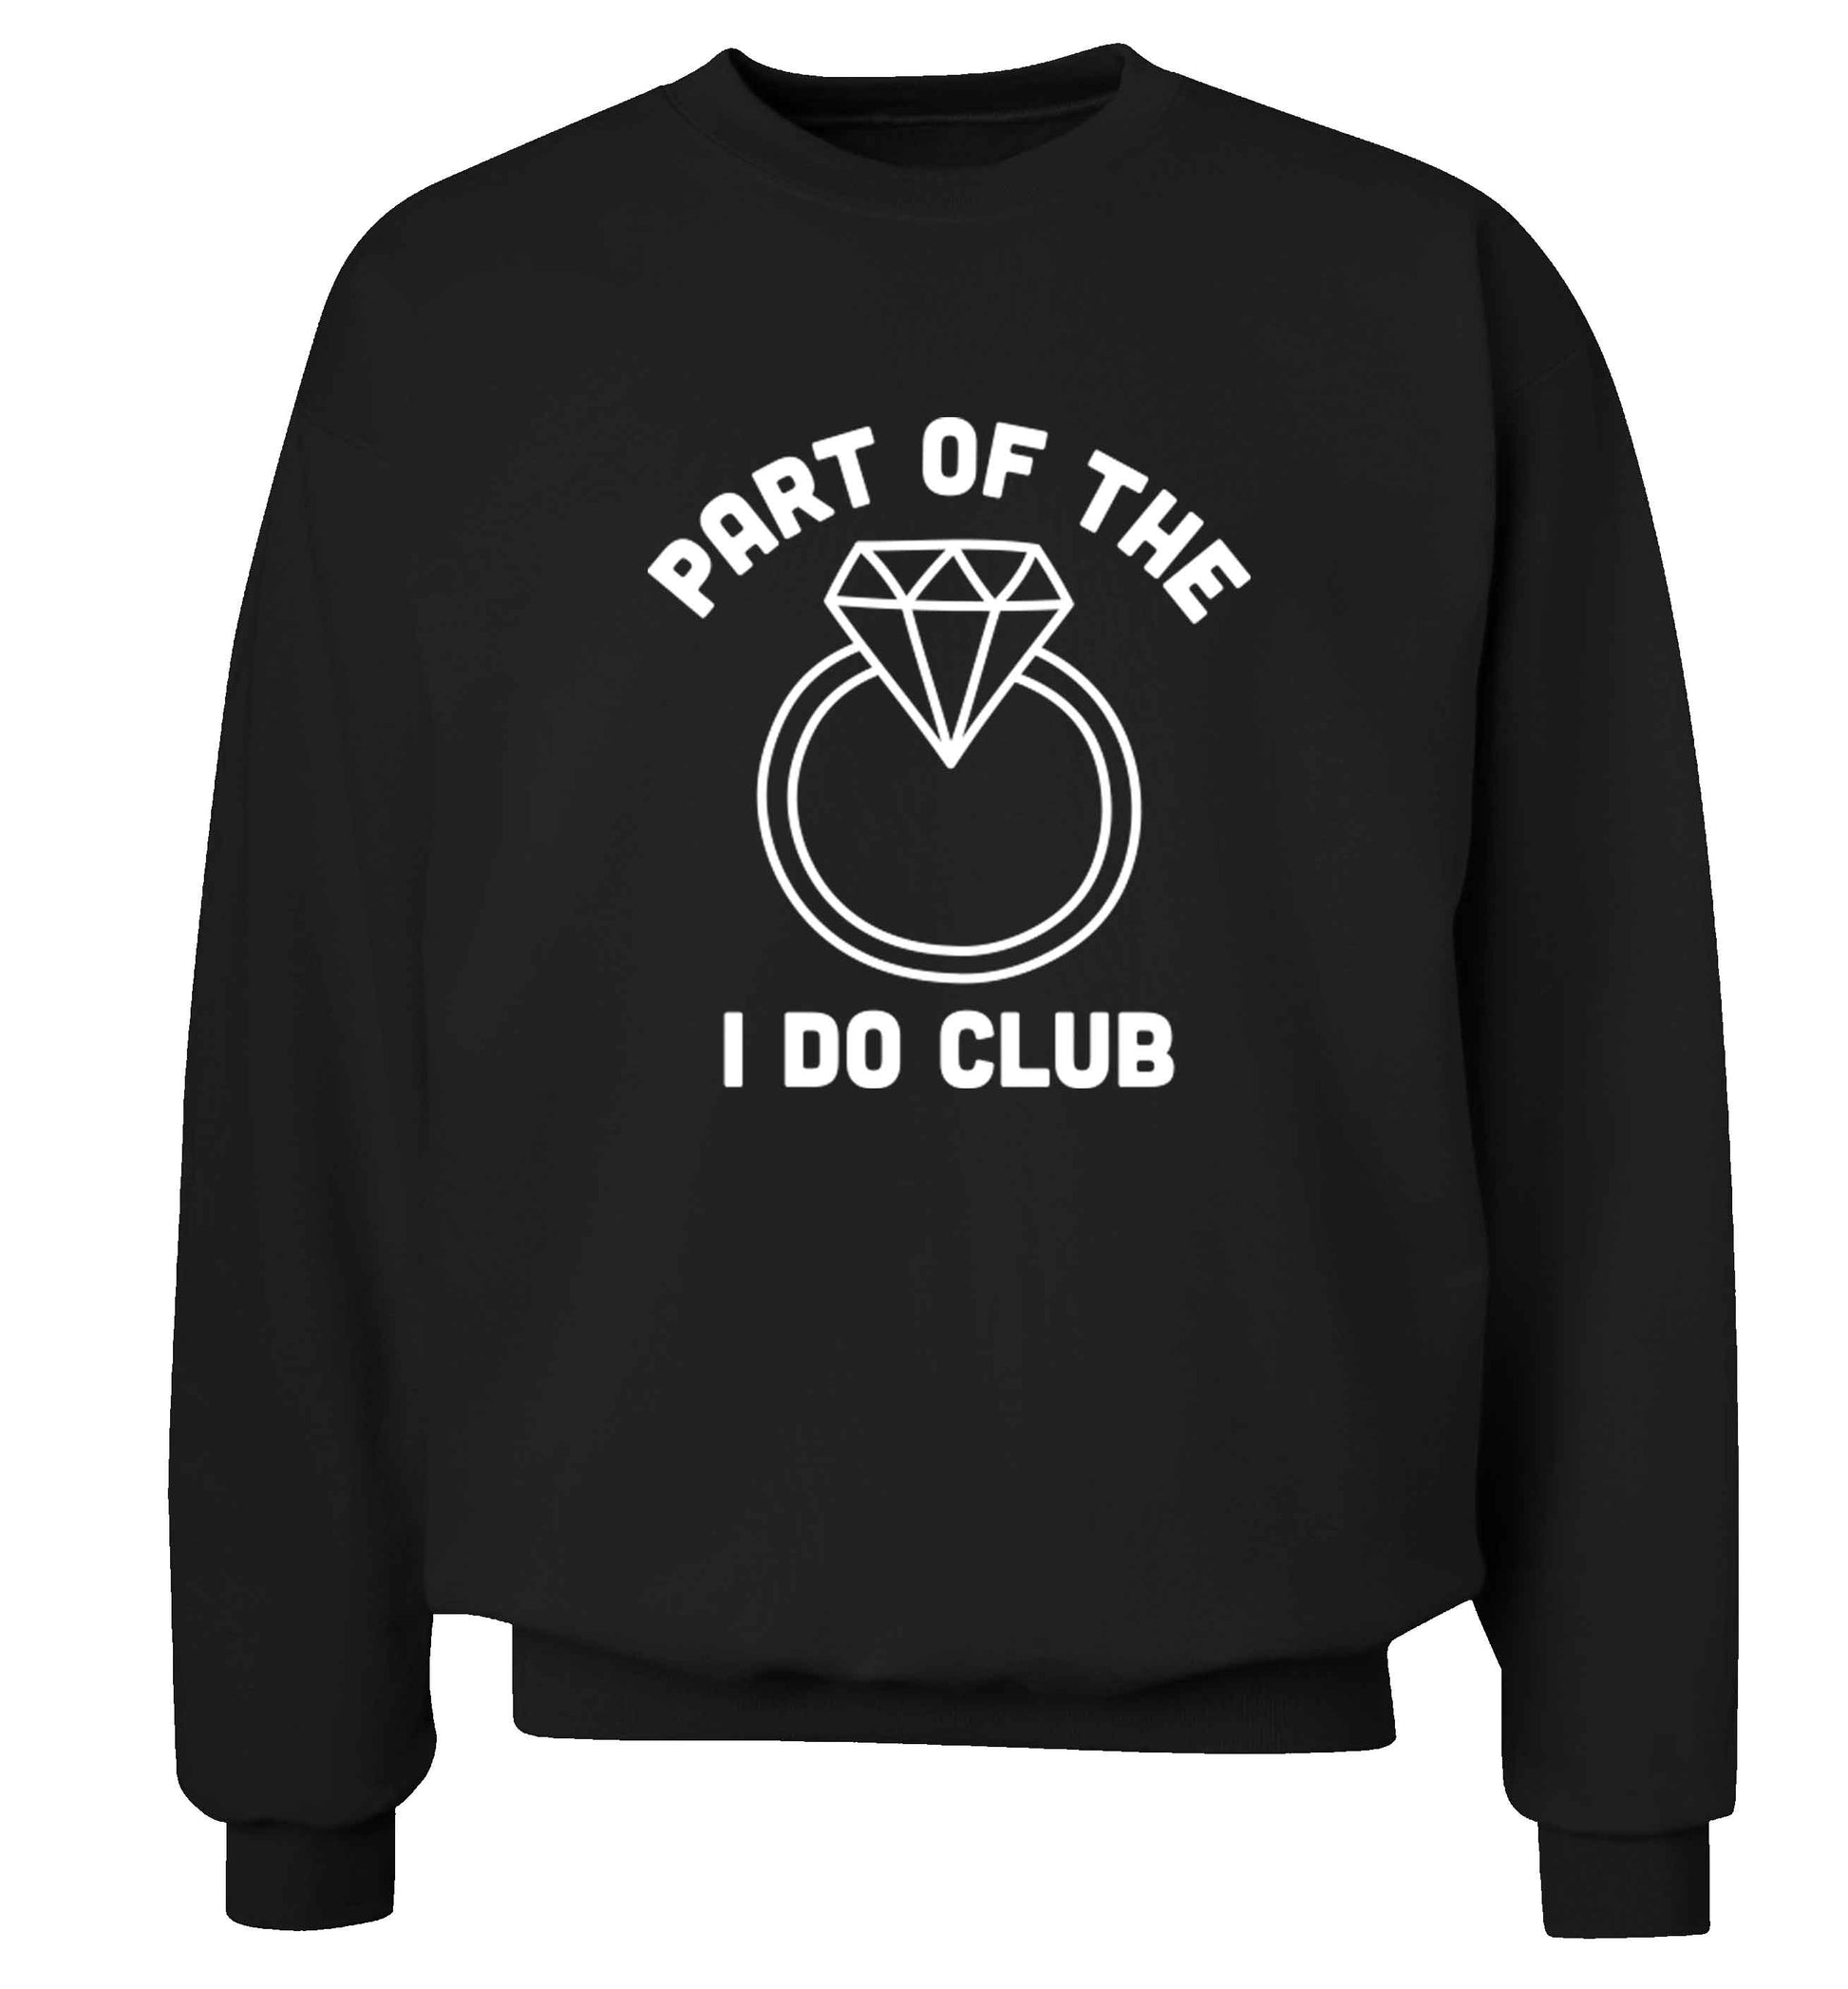 Part of the I do club adult's unisex black sweater 2XL